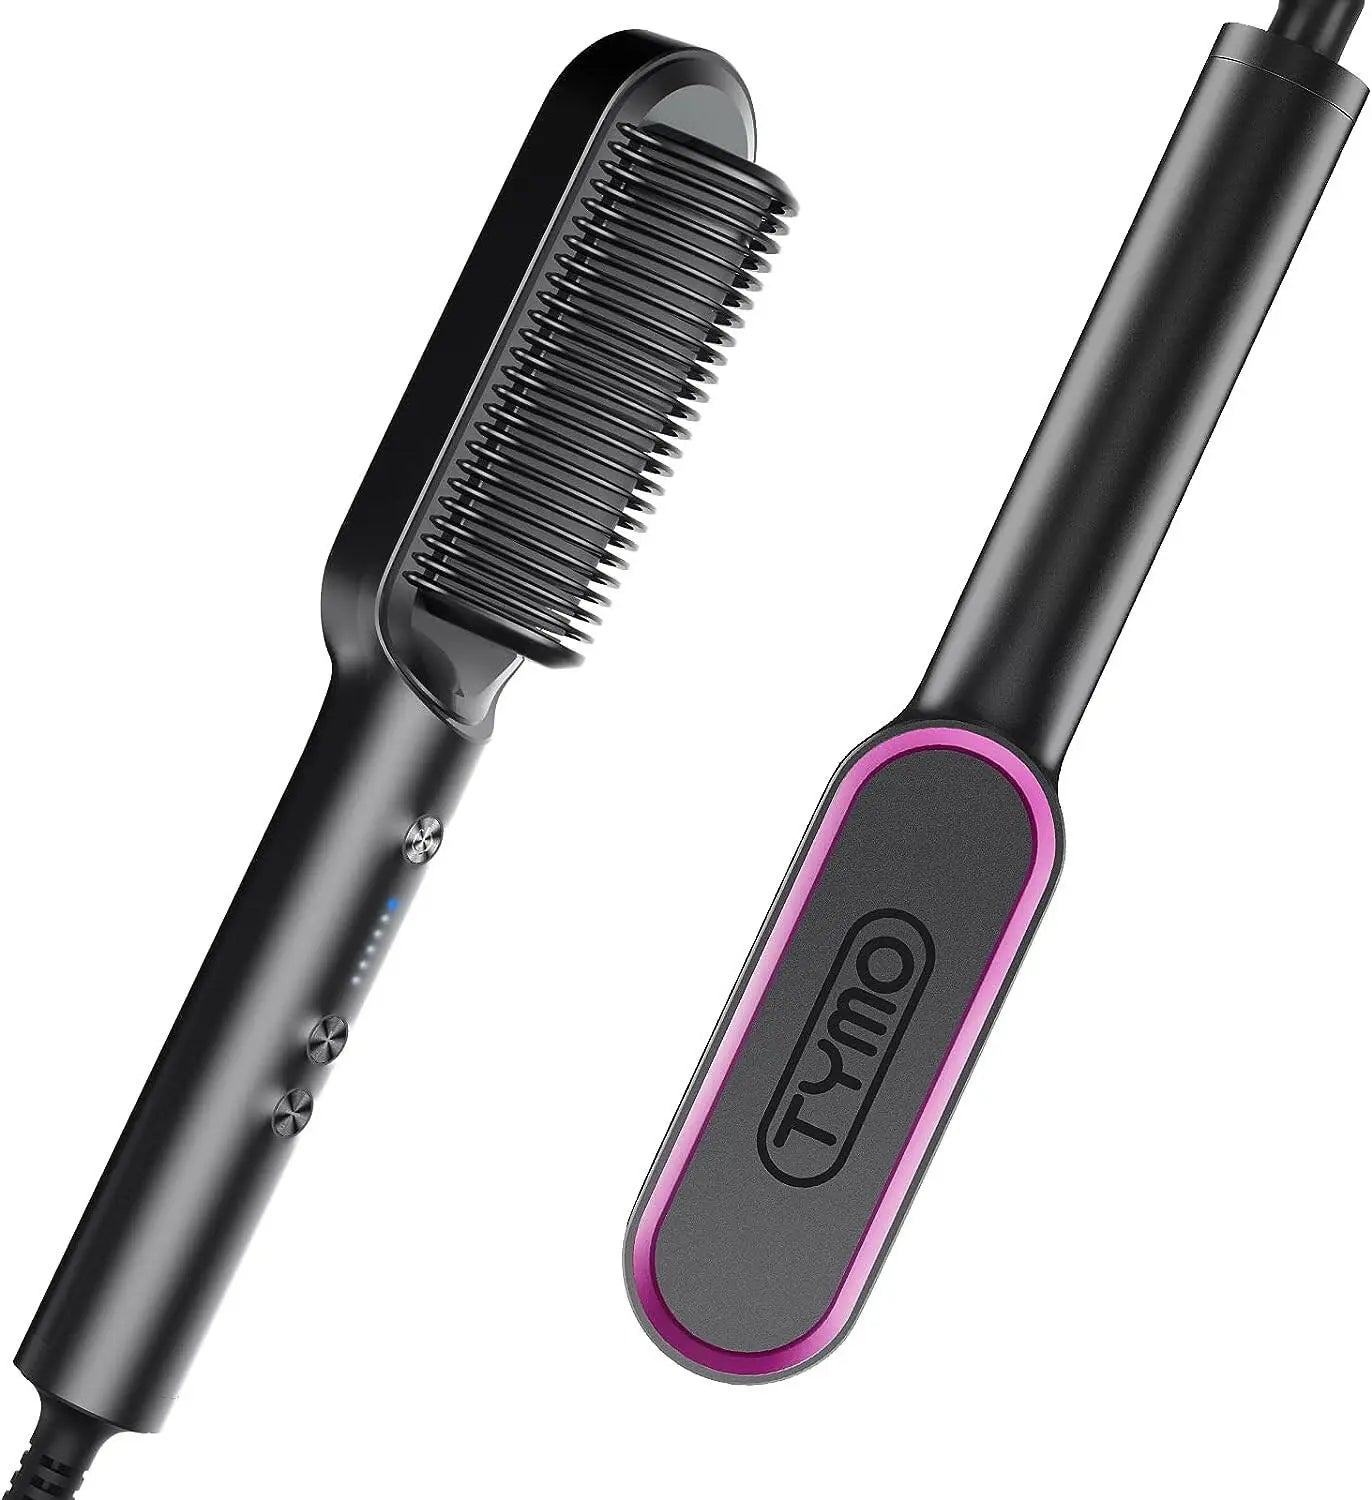 TYMO Hair Straightener Brush, Hair Iron with Built-in Comb. Tourmaline Ceramic Coating. Fast Heating & 5 Temp Settings. Hair Straightener Brush That Salon Styling at Home. (Matte Black)